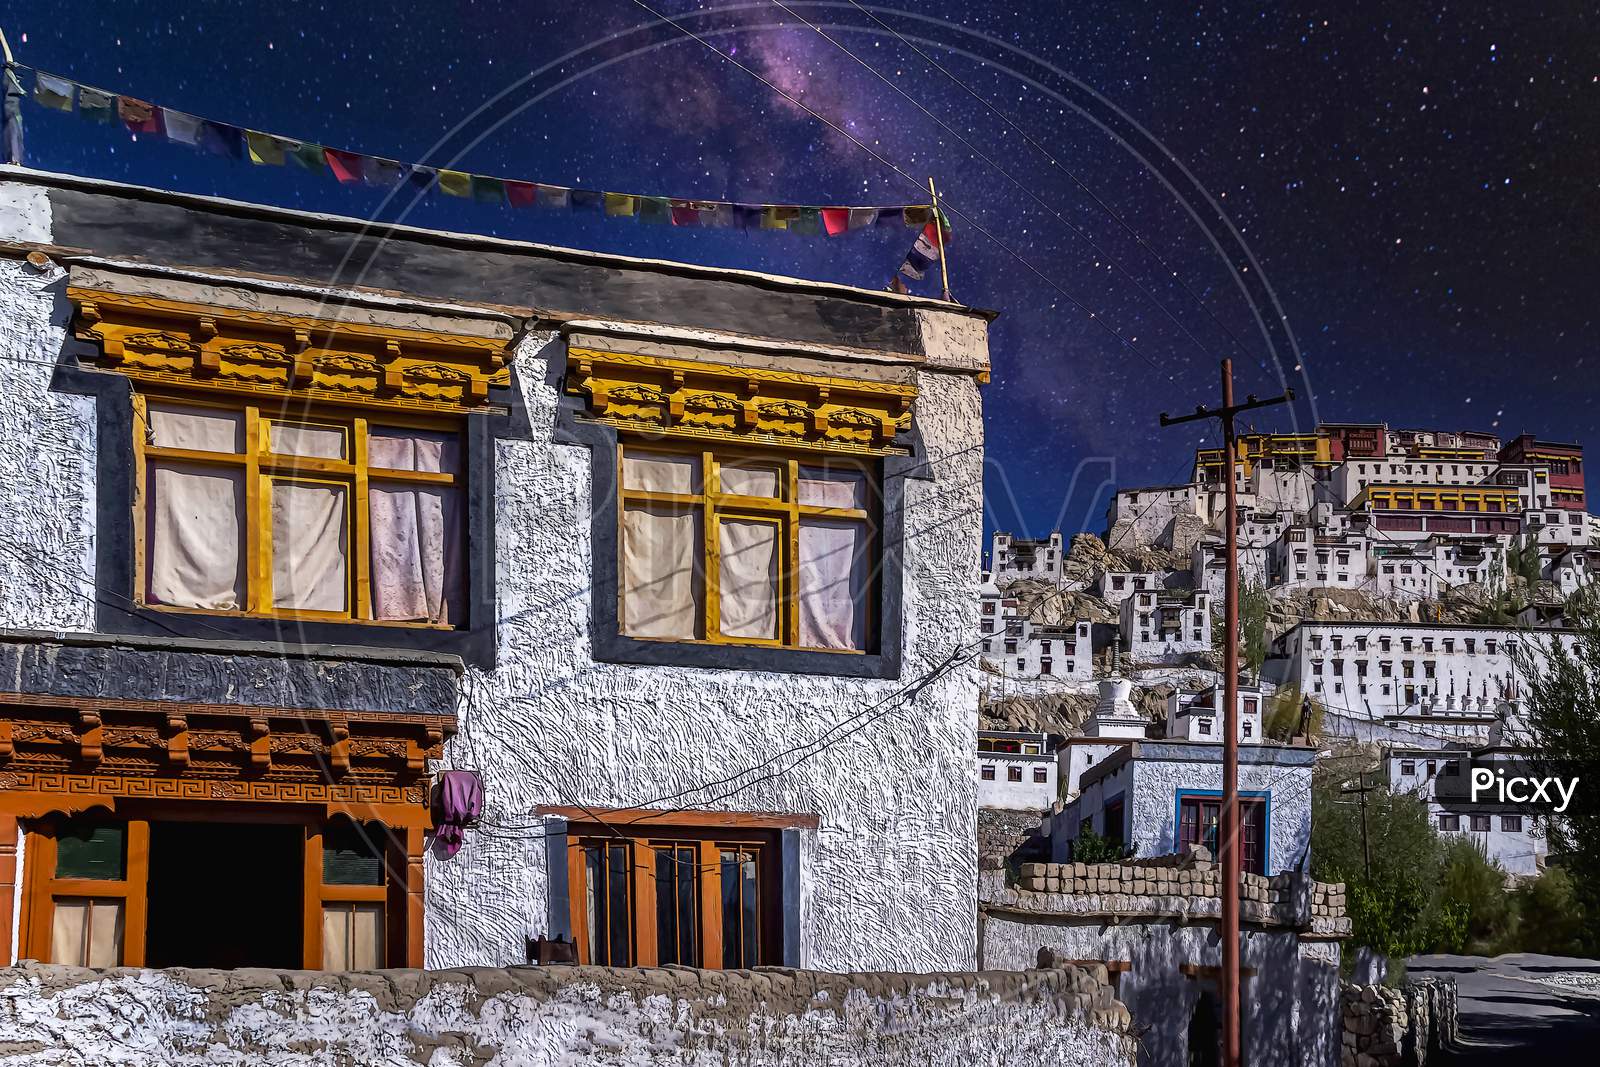 A white painted buddhist home under a starry sky as seen at the Thikse Monastery village near Leh city, Ladakh, India